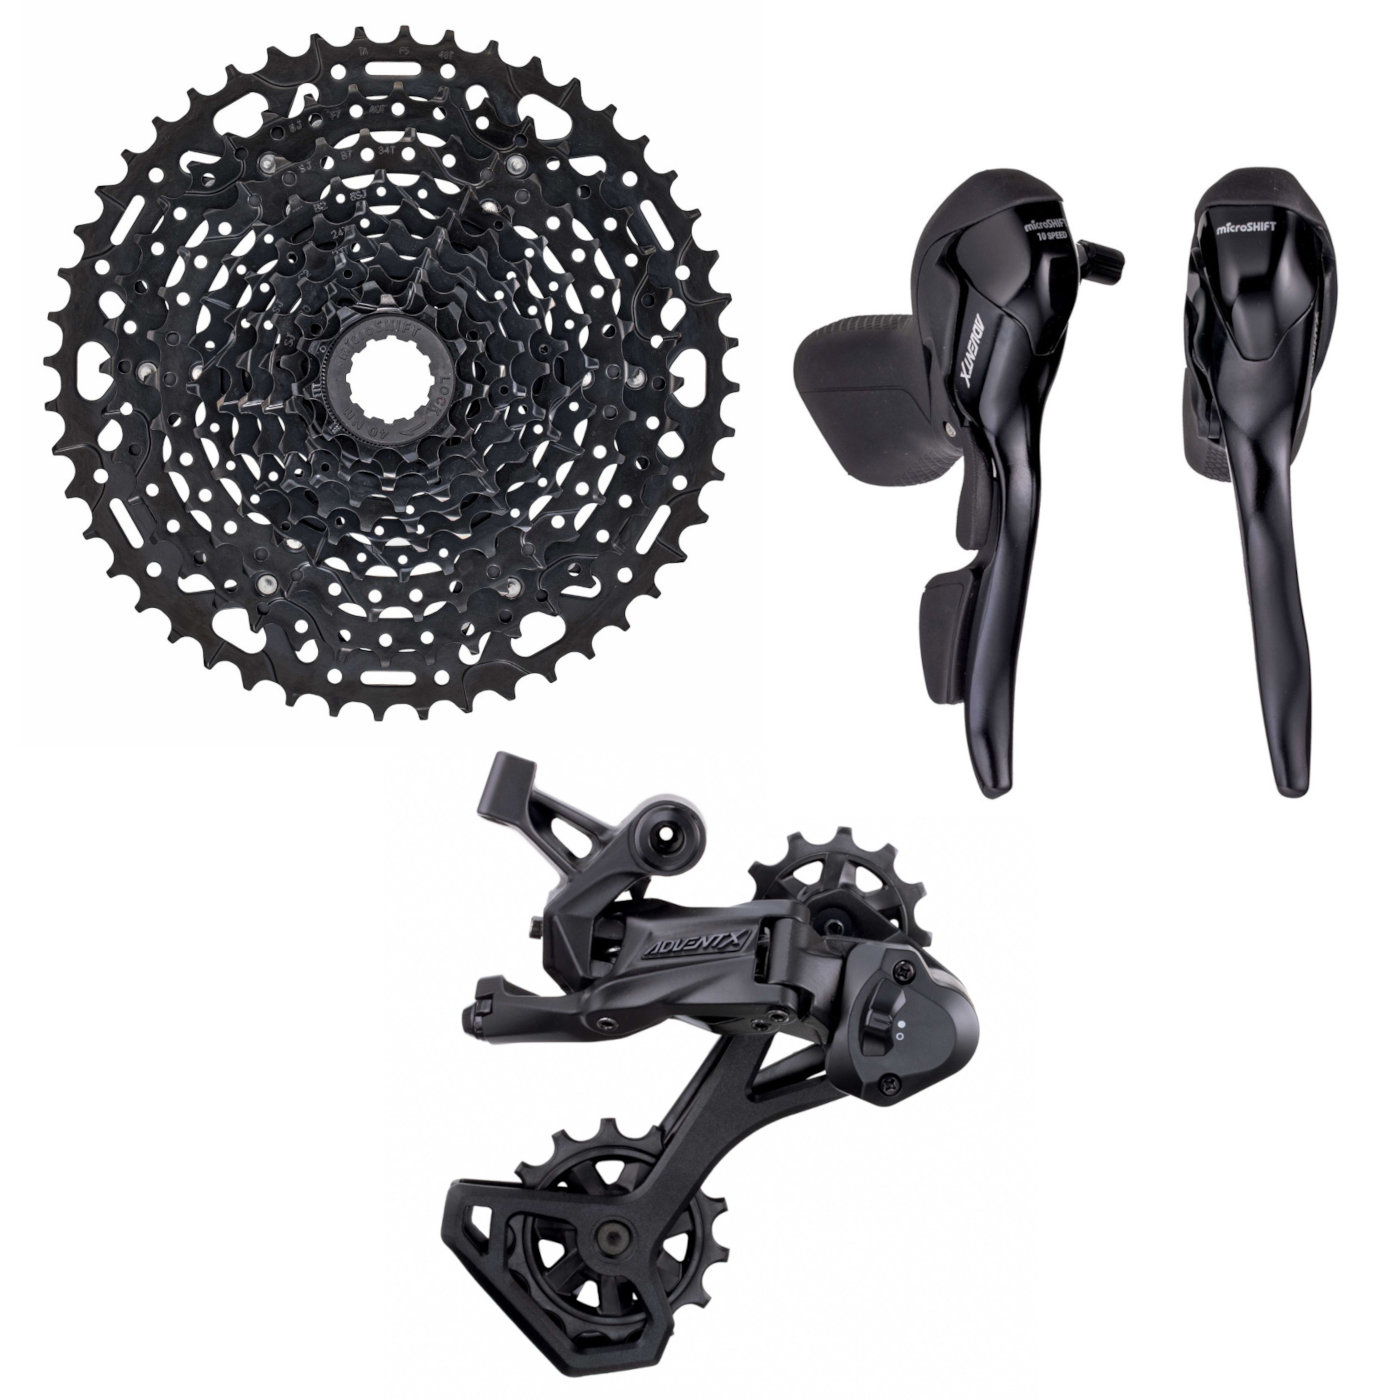 Productfoto van microSHIFT ADVENT X Group with Shift-/Brakelevers for Drop Bars - 1x10-speed